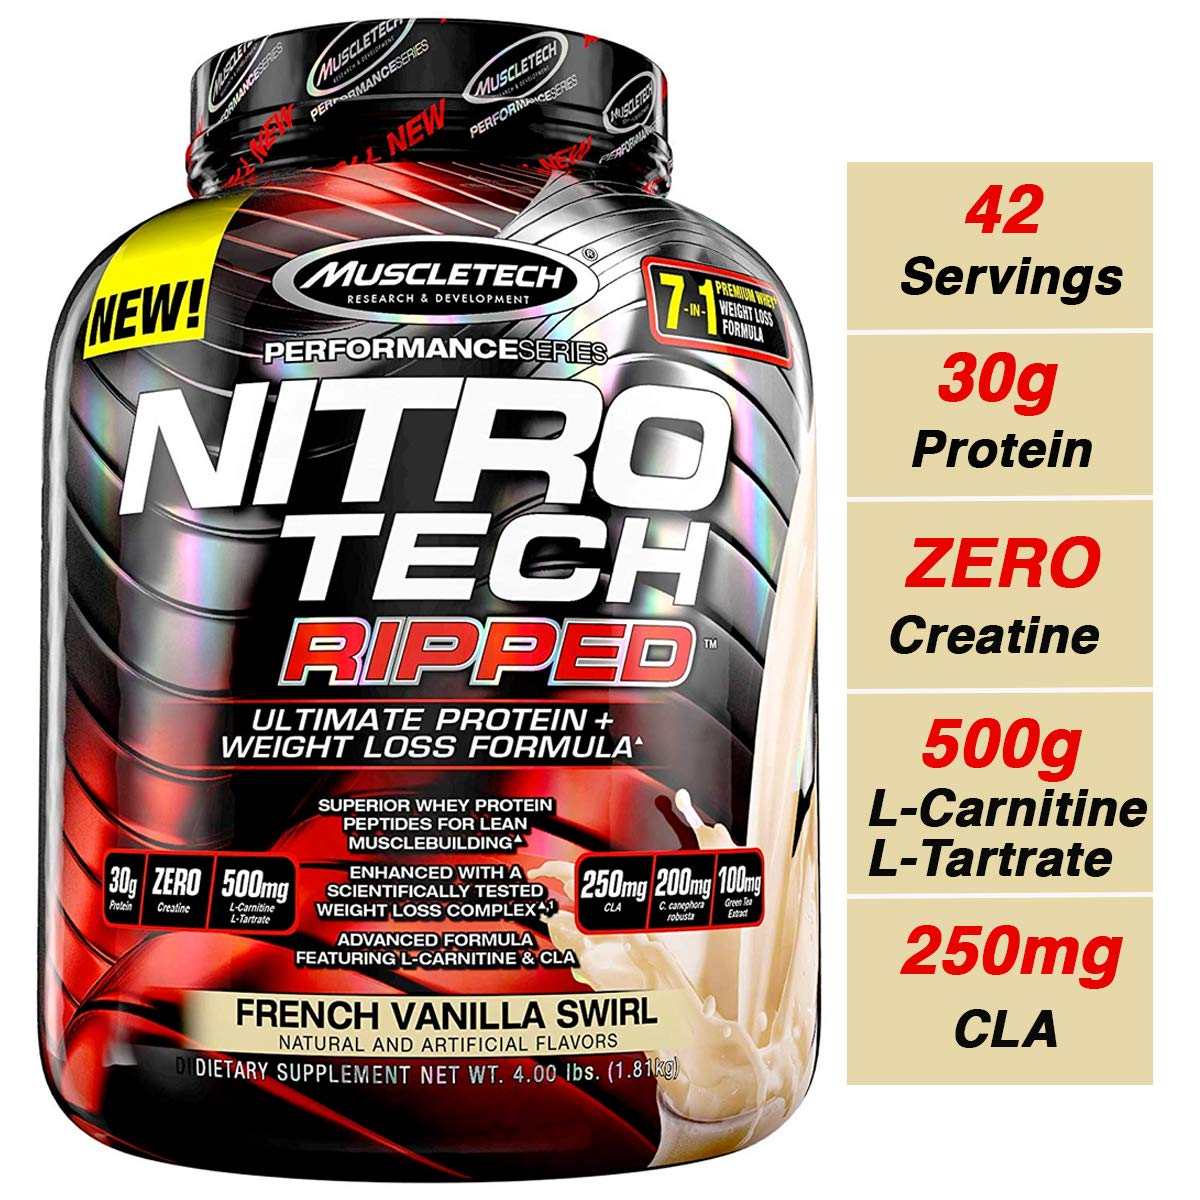 MuscleTech Nitro Tech Ripped Ultra Clean Whey Protein Isolate Powder + Weight Loss Formula, Low Sugar, Low Carb, French Vanilla Swirl, 4 Pounds